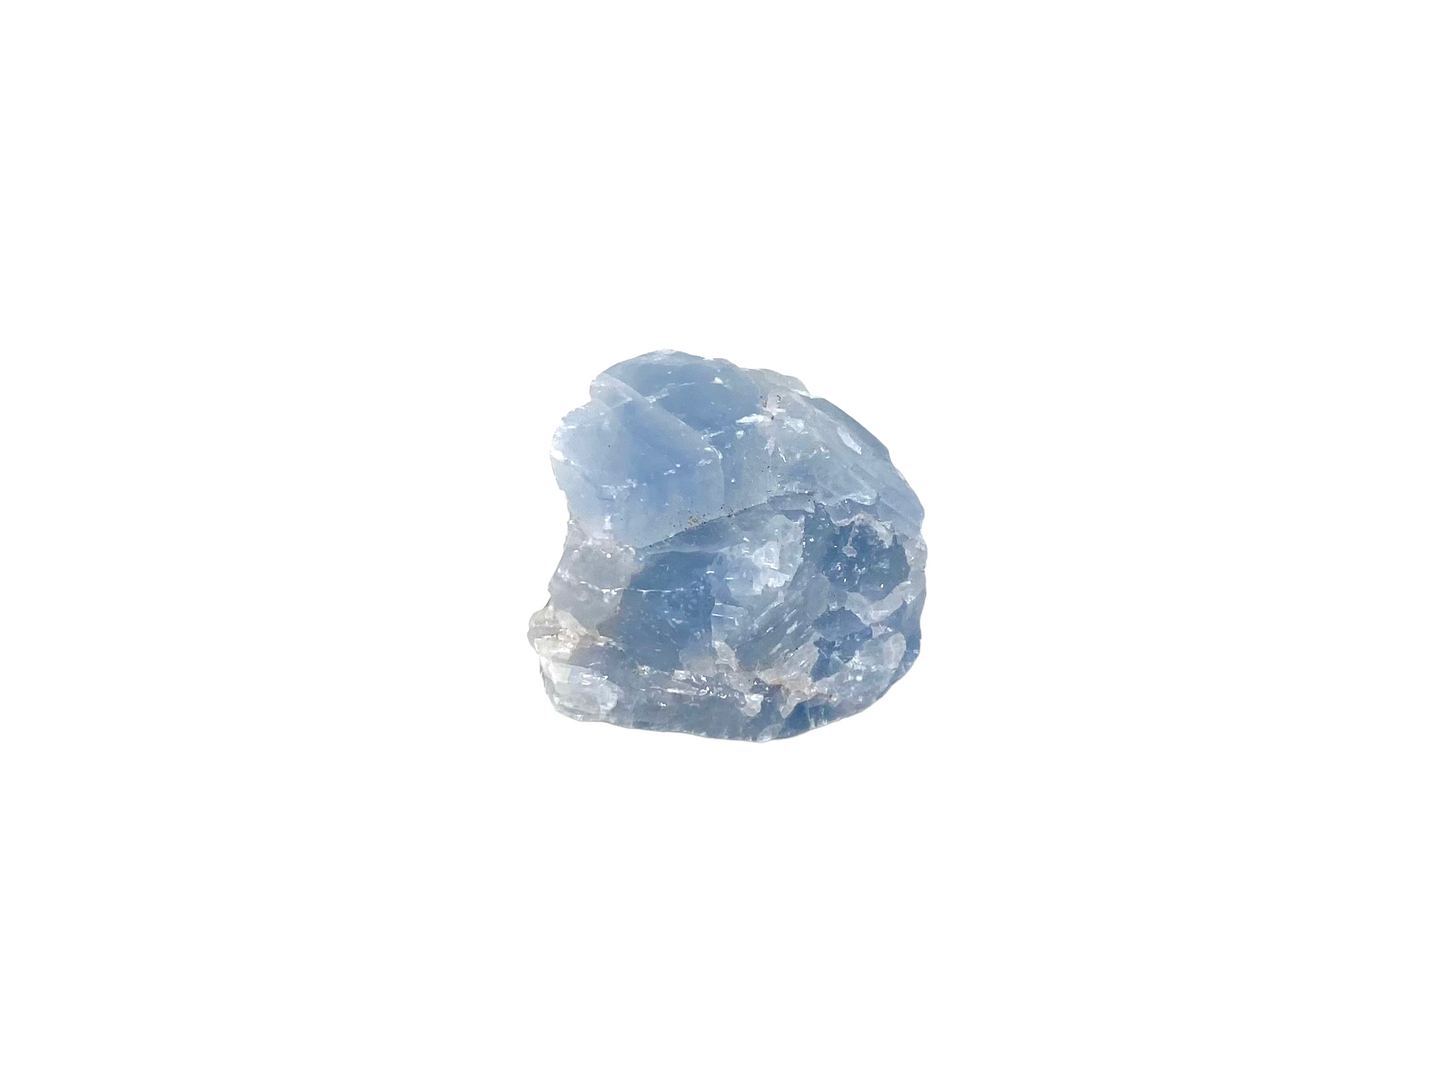 Raw Blue Calcite From Mexico